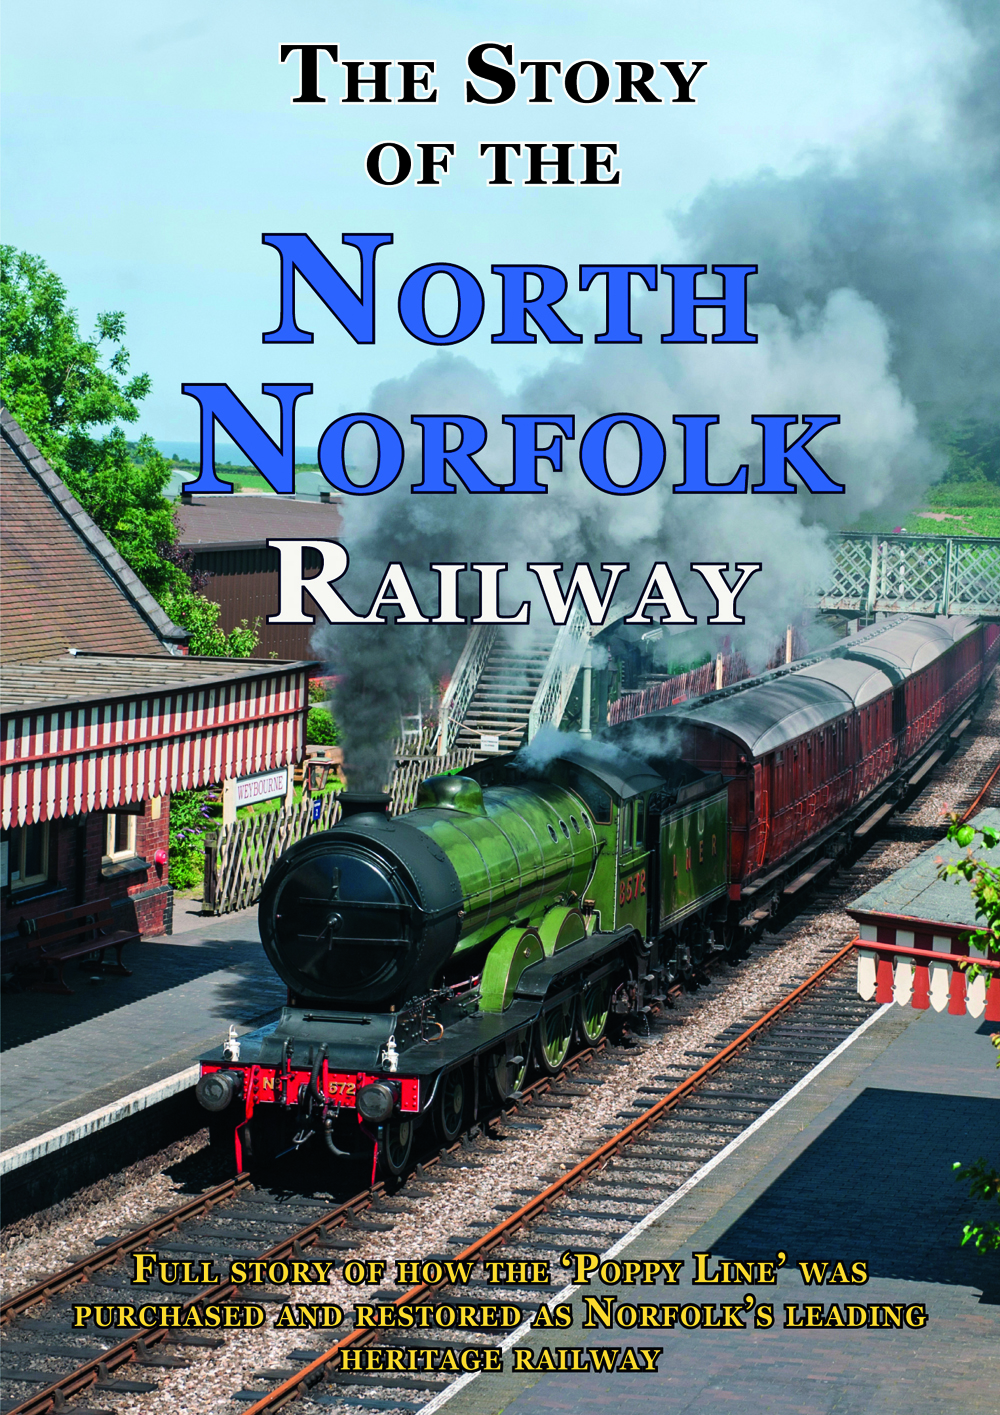 The Story of the North Norfolk Railway